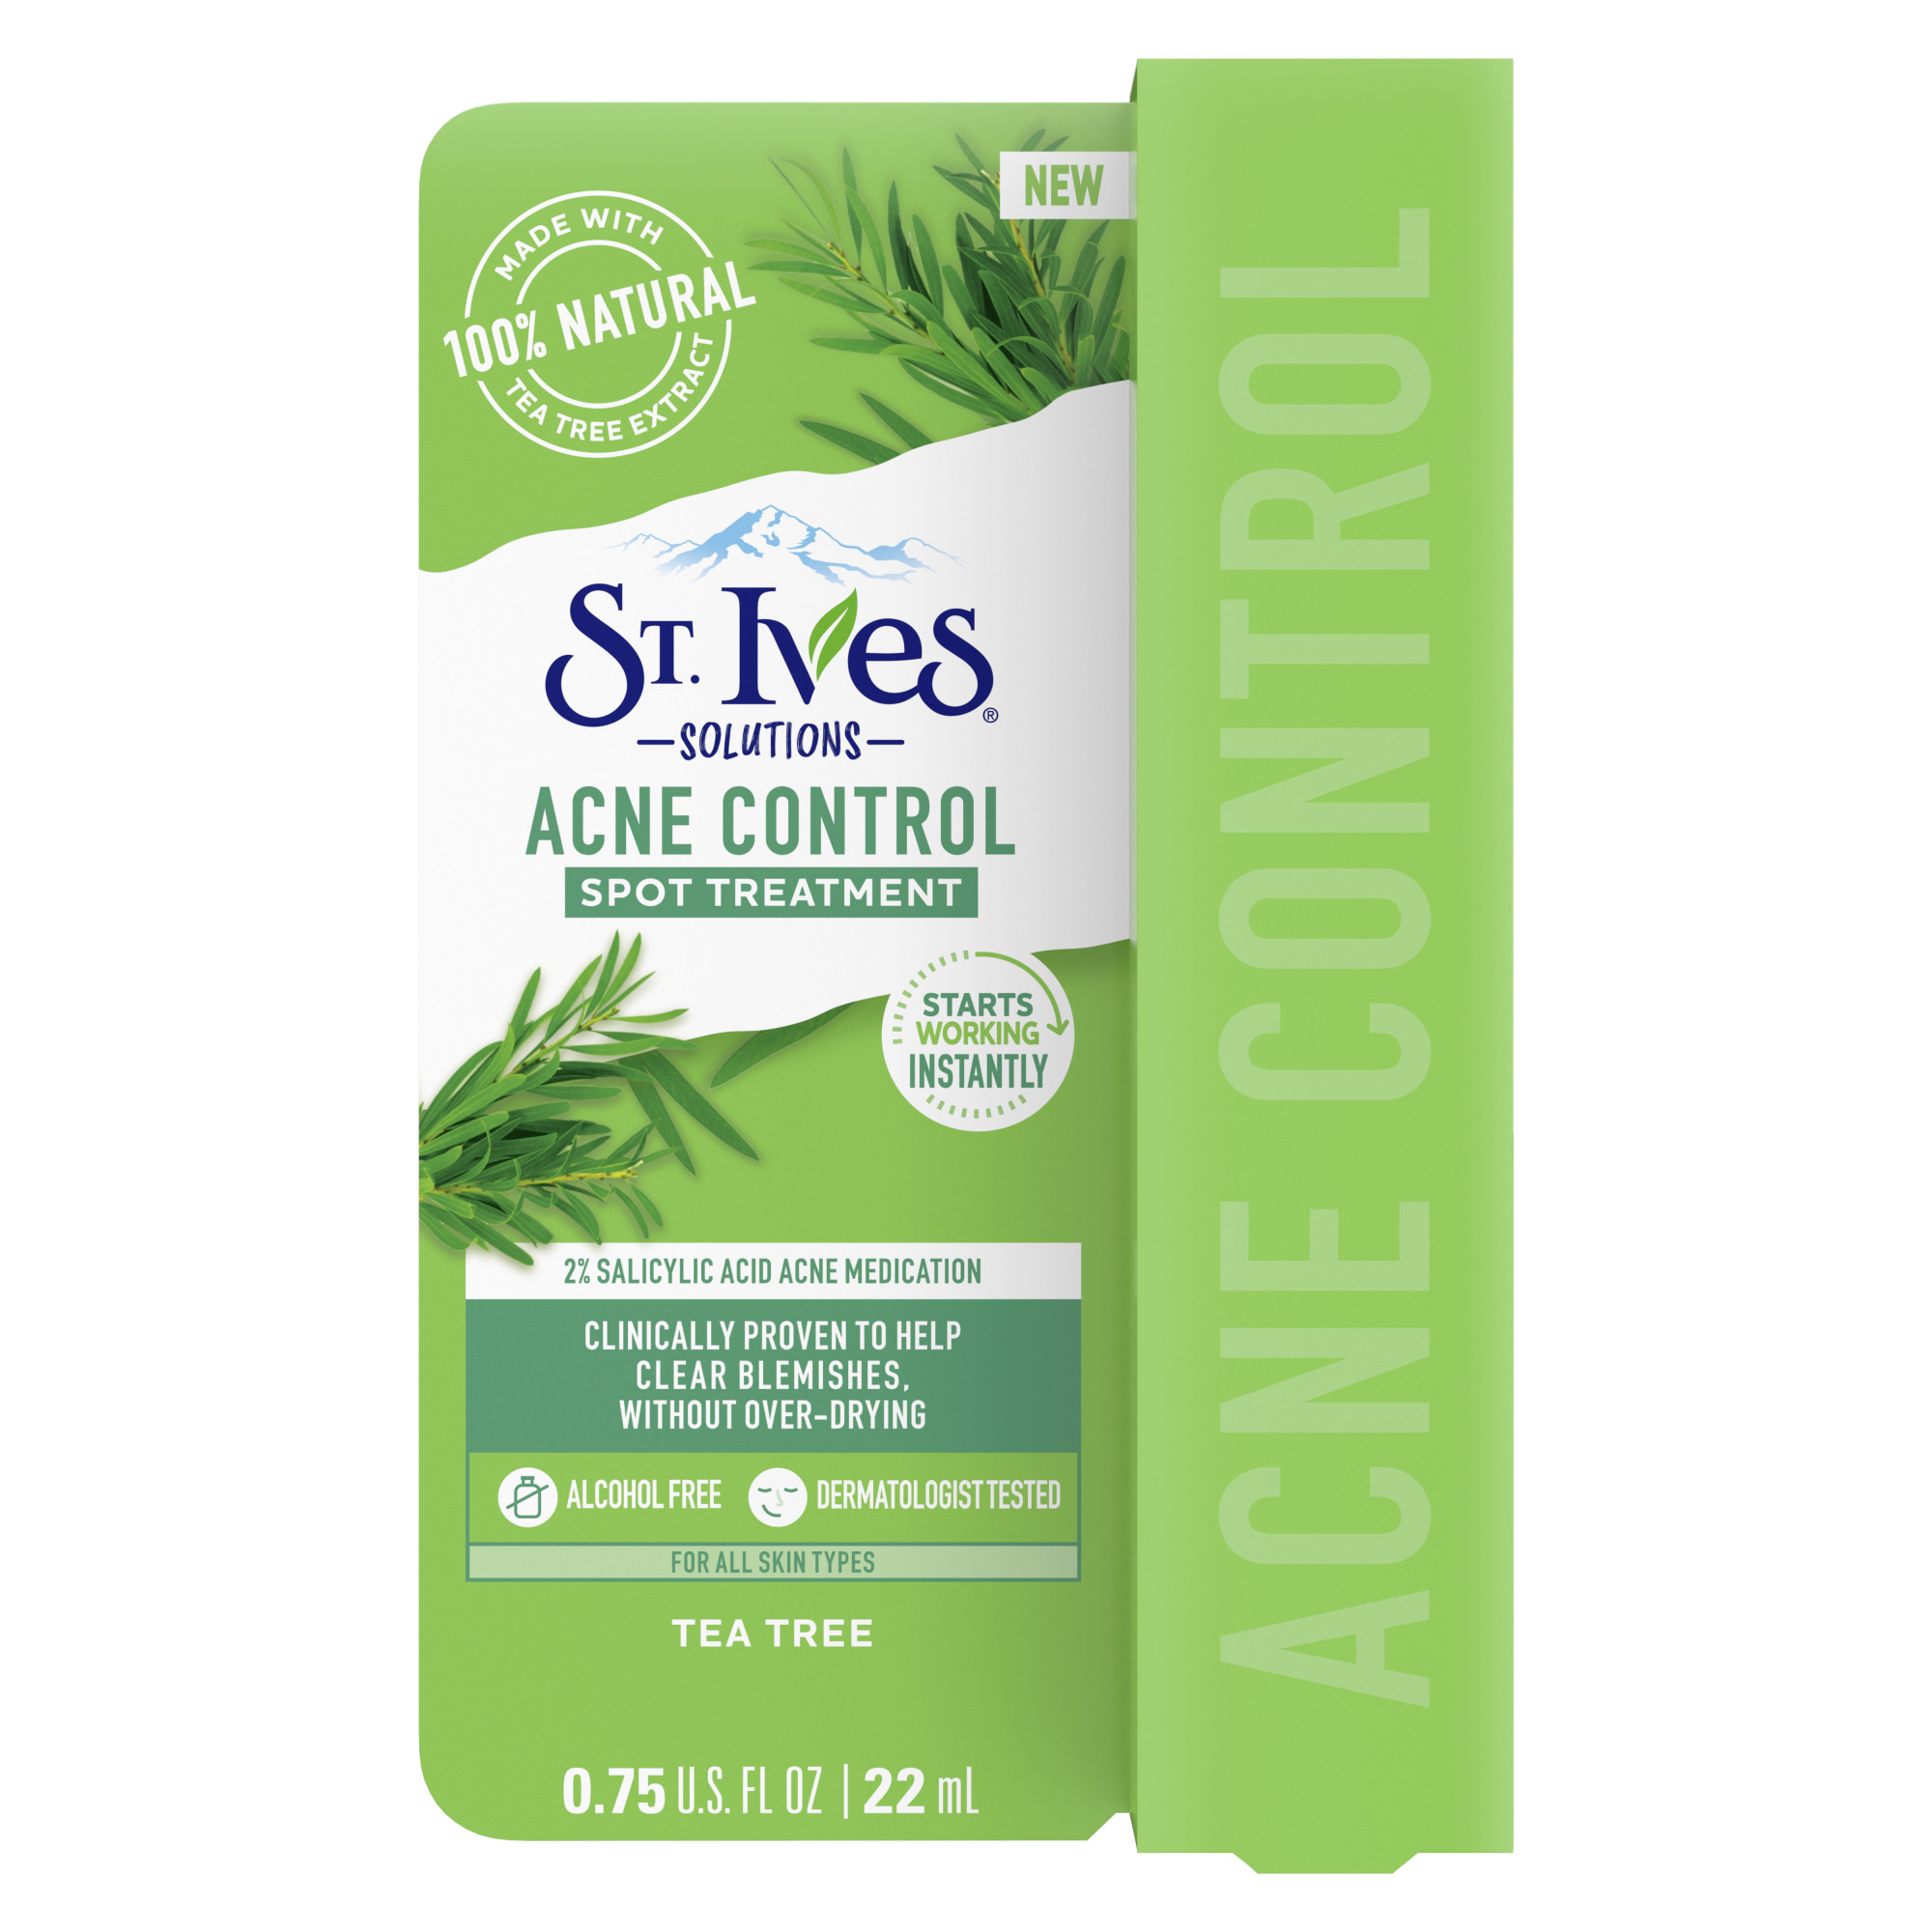 St. Ives Solutions Spot Treatment For Blemish Redness Reduction Acne Control Made with 2% Salicylic Acid and 100% Natural Tea Tree Extract 0.75 oz - image 13 of 16